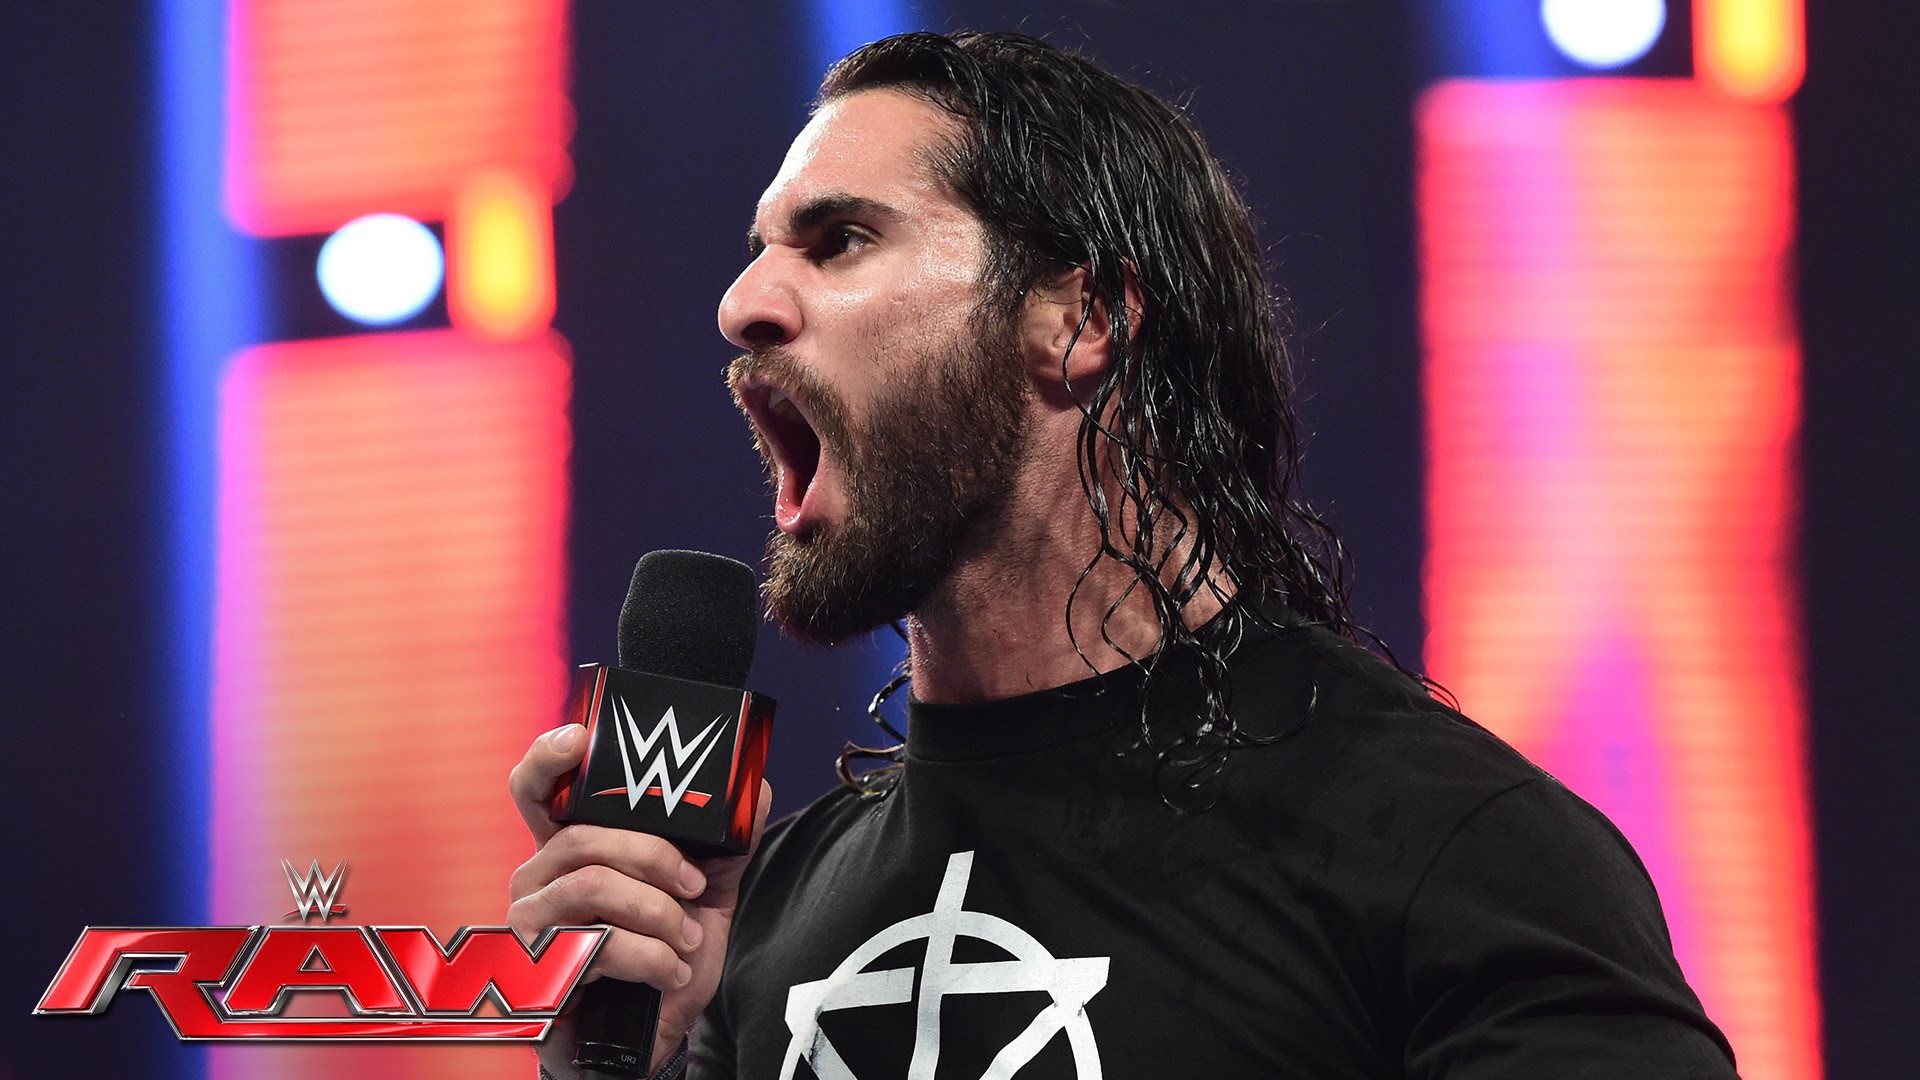 Seth Rollins asks the tough questions to Roman Reigns Raw, July 11, 2016